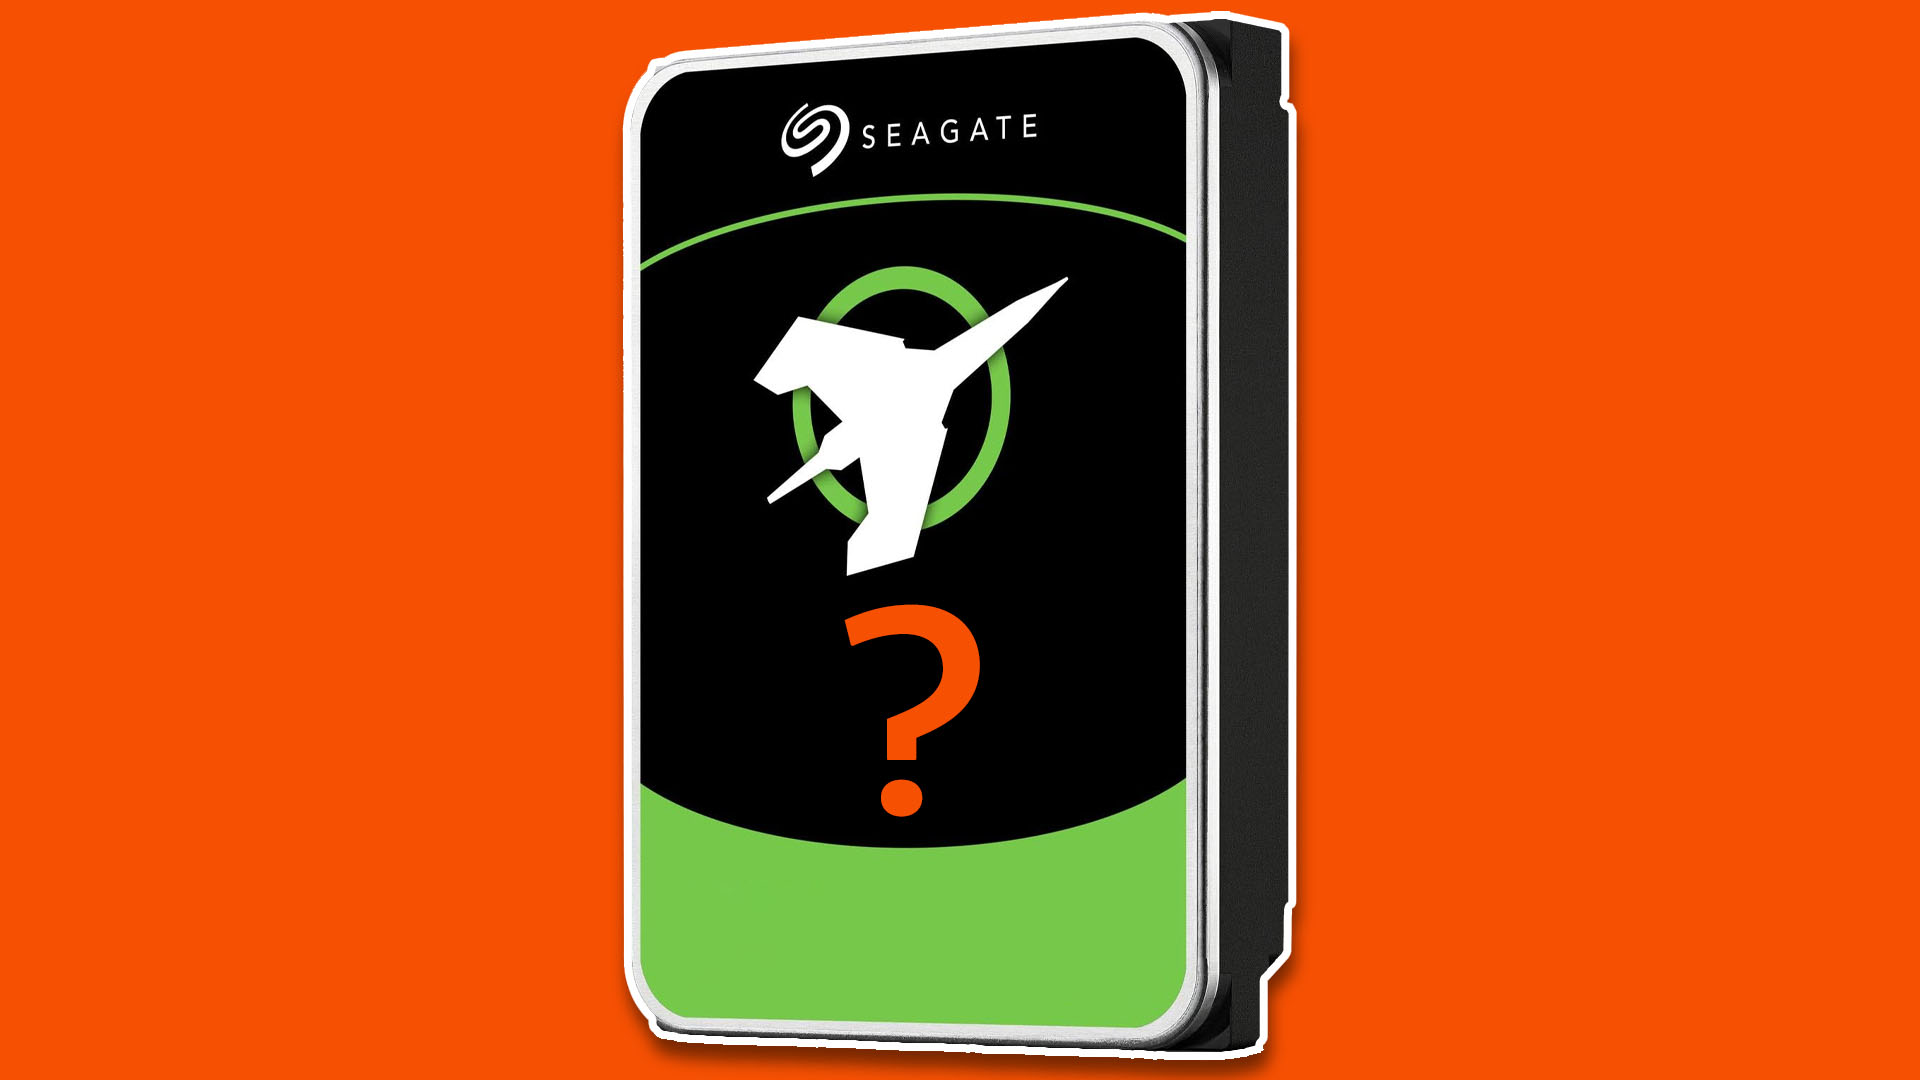 It's official, this 8TB Seagate hard drive is the most reliable around